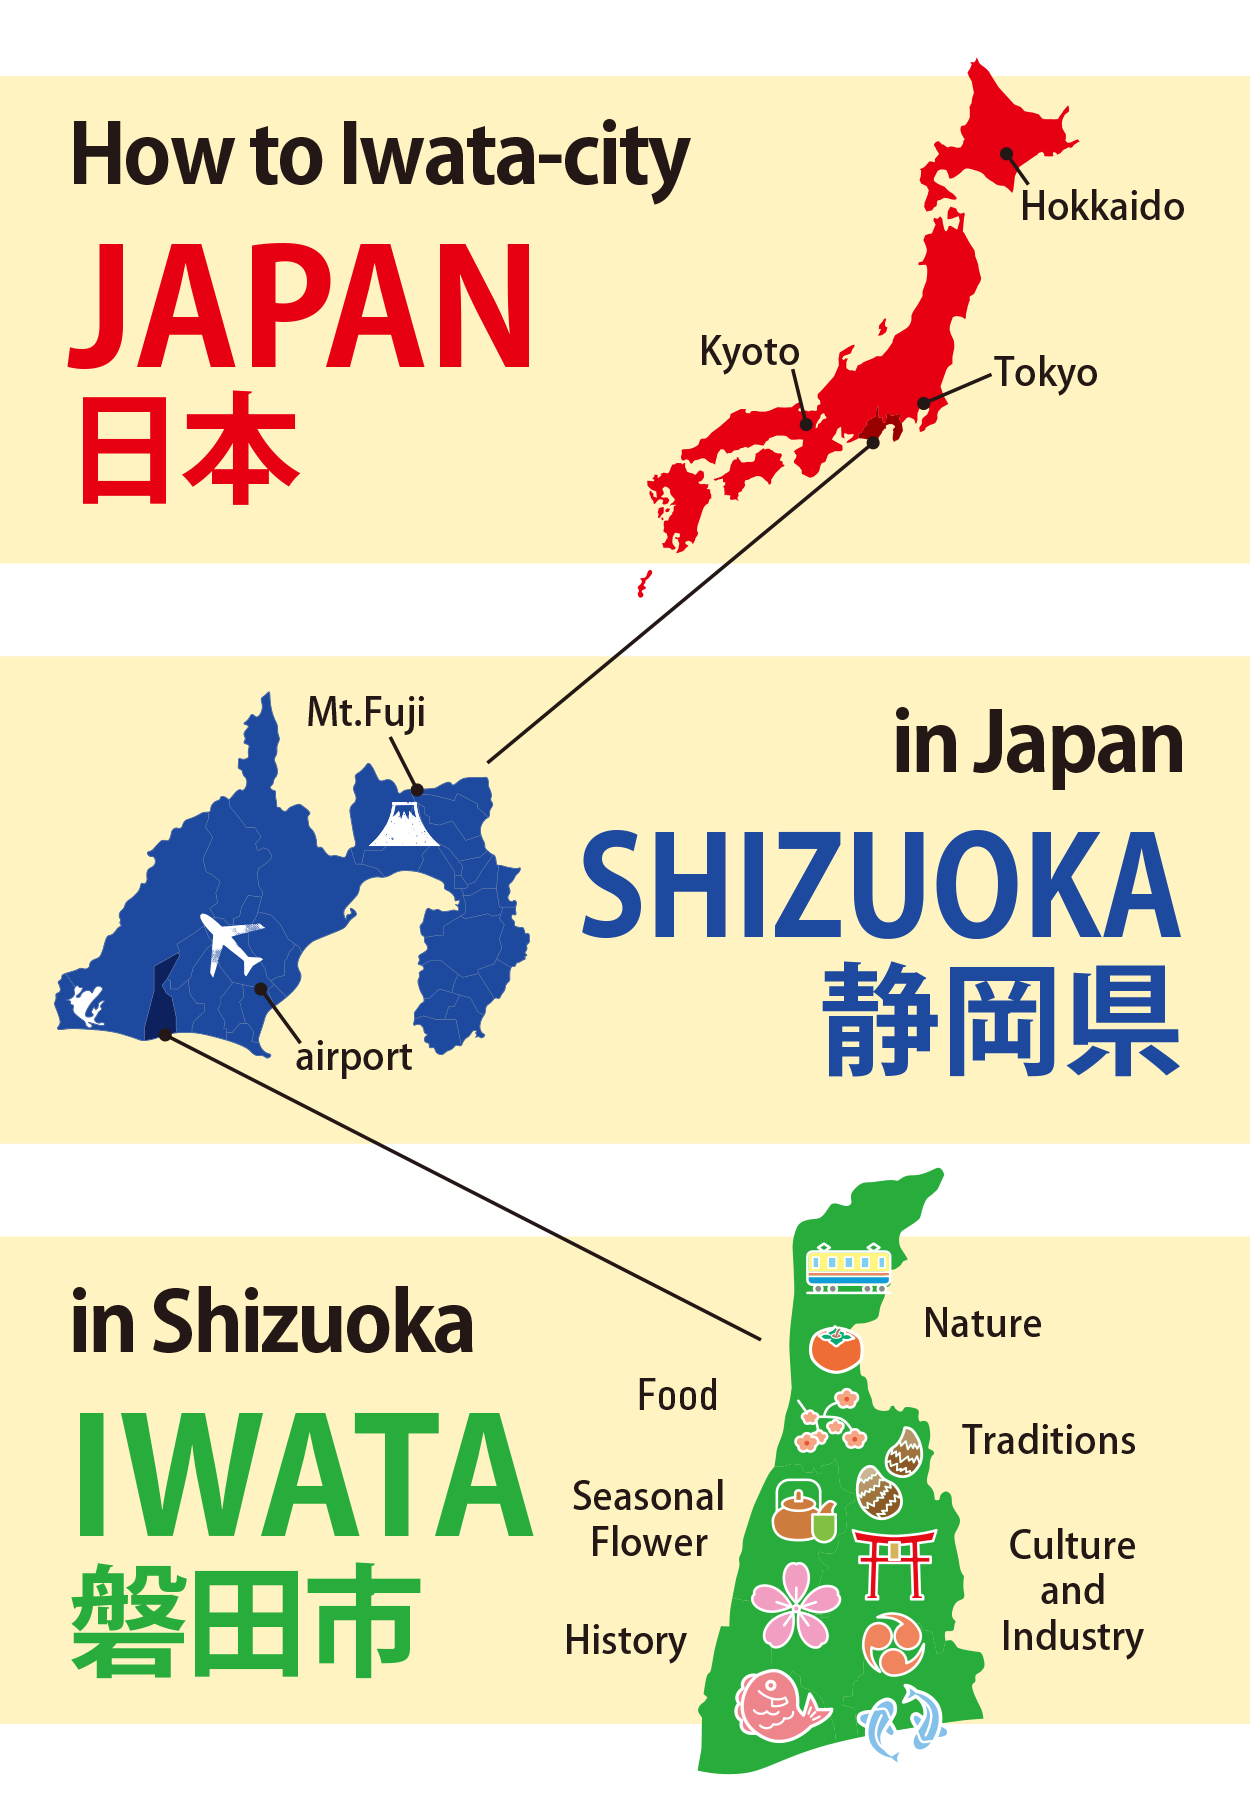 Iwata city is in Japan